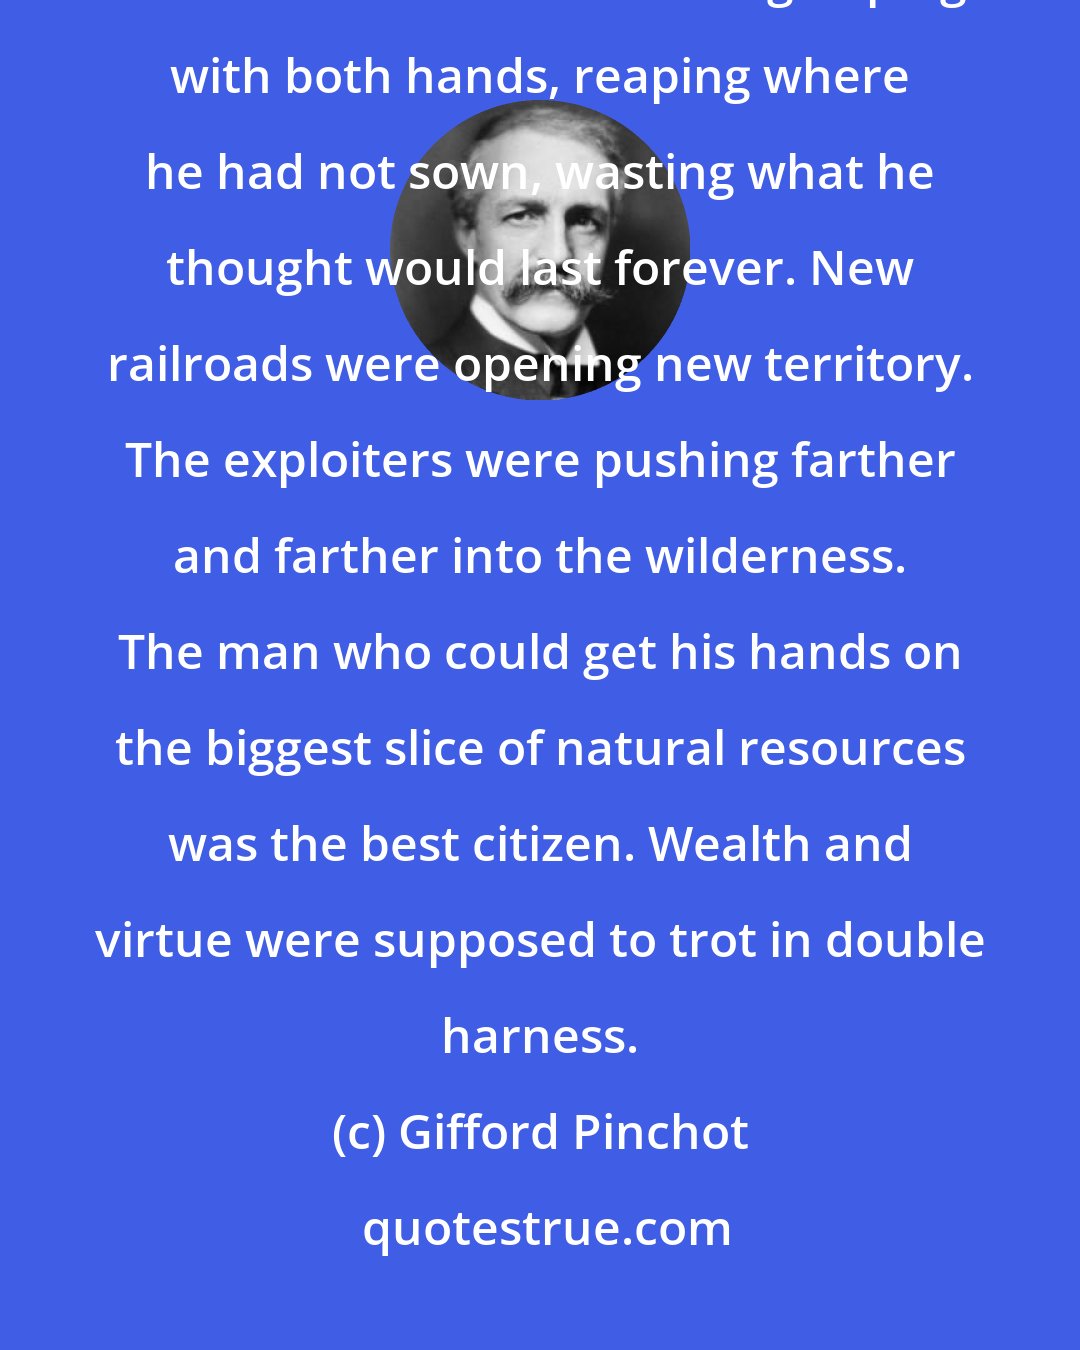 Gifford Pinchot: The American Colossus was fiercely intent on appropriating and exploiting the riches of all continents - grasping with both hands, reaping where he had not sown, wasting what he thought would last forever. New railroads were opening new territory. The exploiters were pushing farther and farther into the wilderness. The man who could get his hands on the biggest slice of natural resources was the best citizen. Wealth and virtue were supposed to trot in double harness.